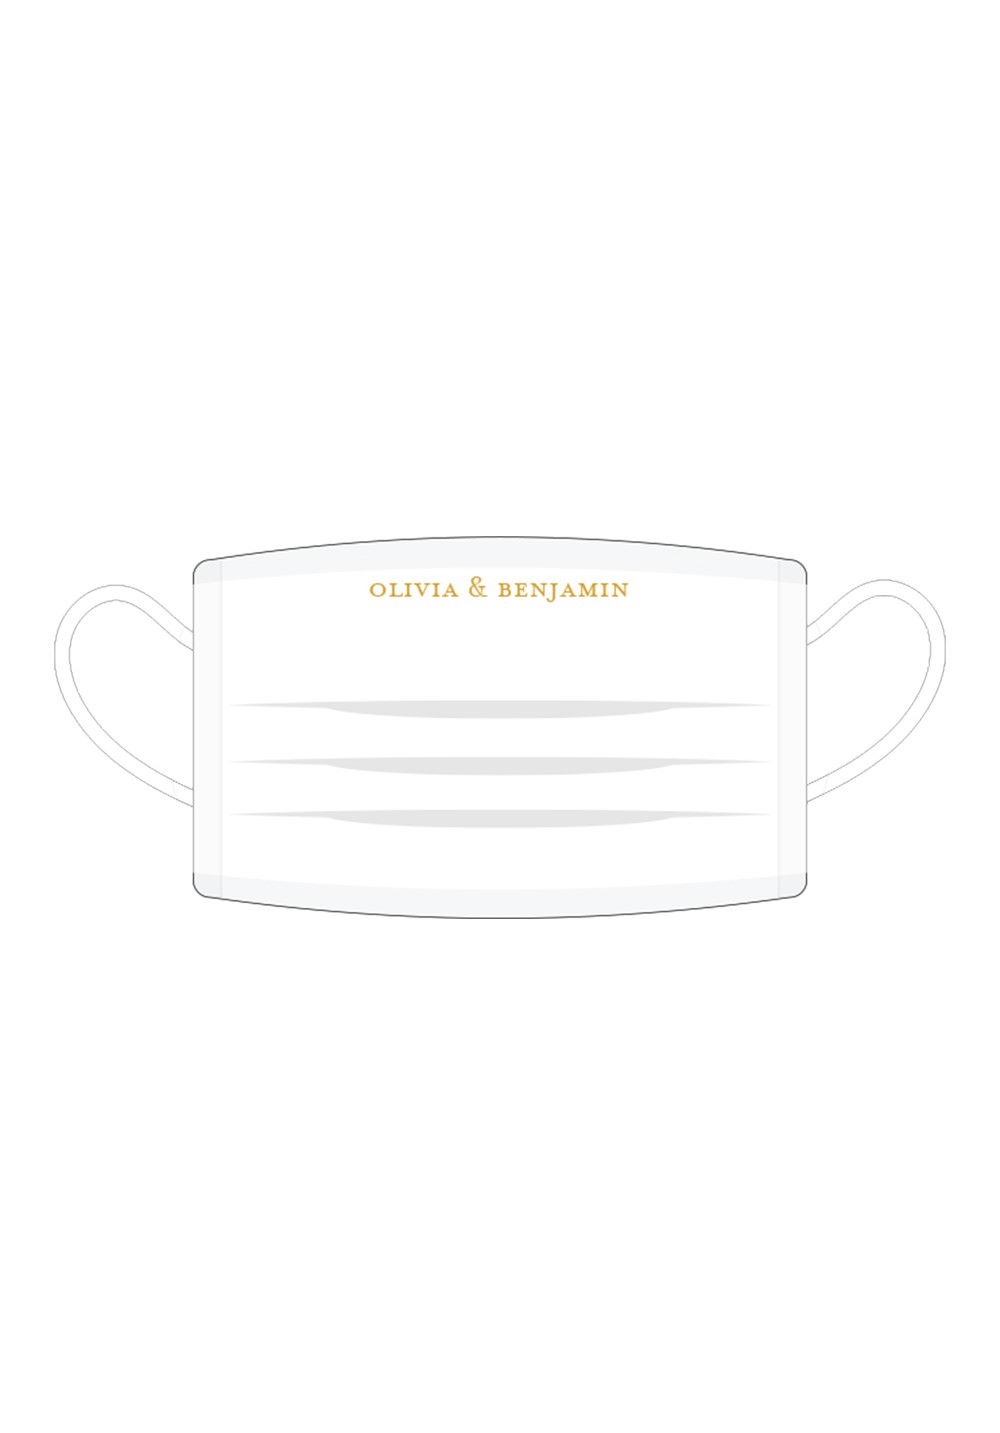 Freesia Disposable Face Mask | Paper Daisies Stationery